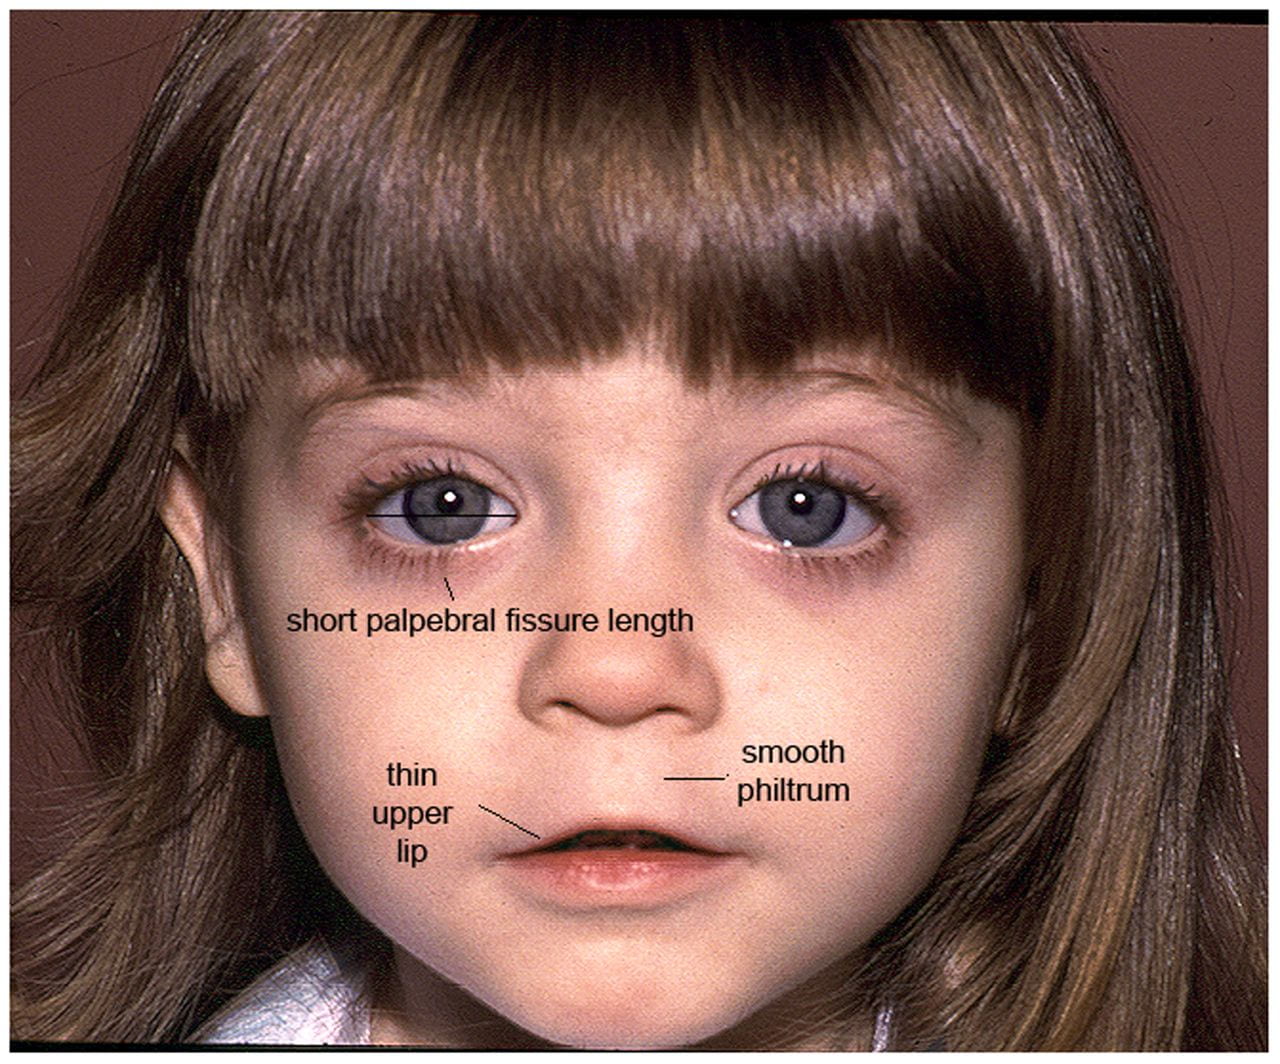 A photo describing a child with FAS - short palpebral fissure length, thin upper lip, smooth philtrum.